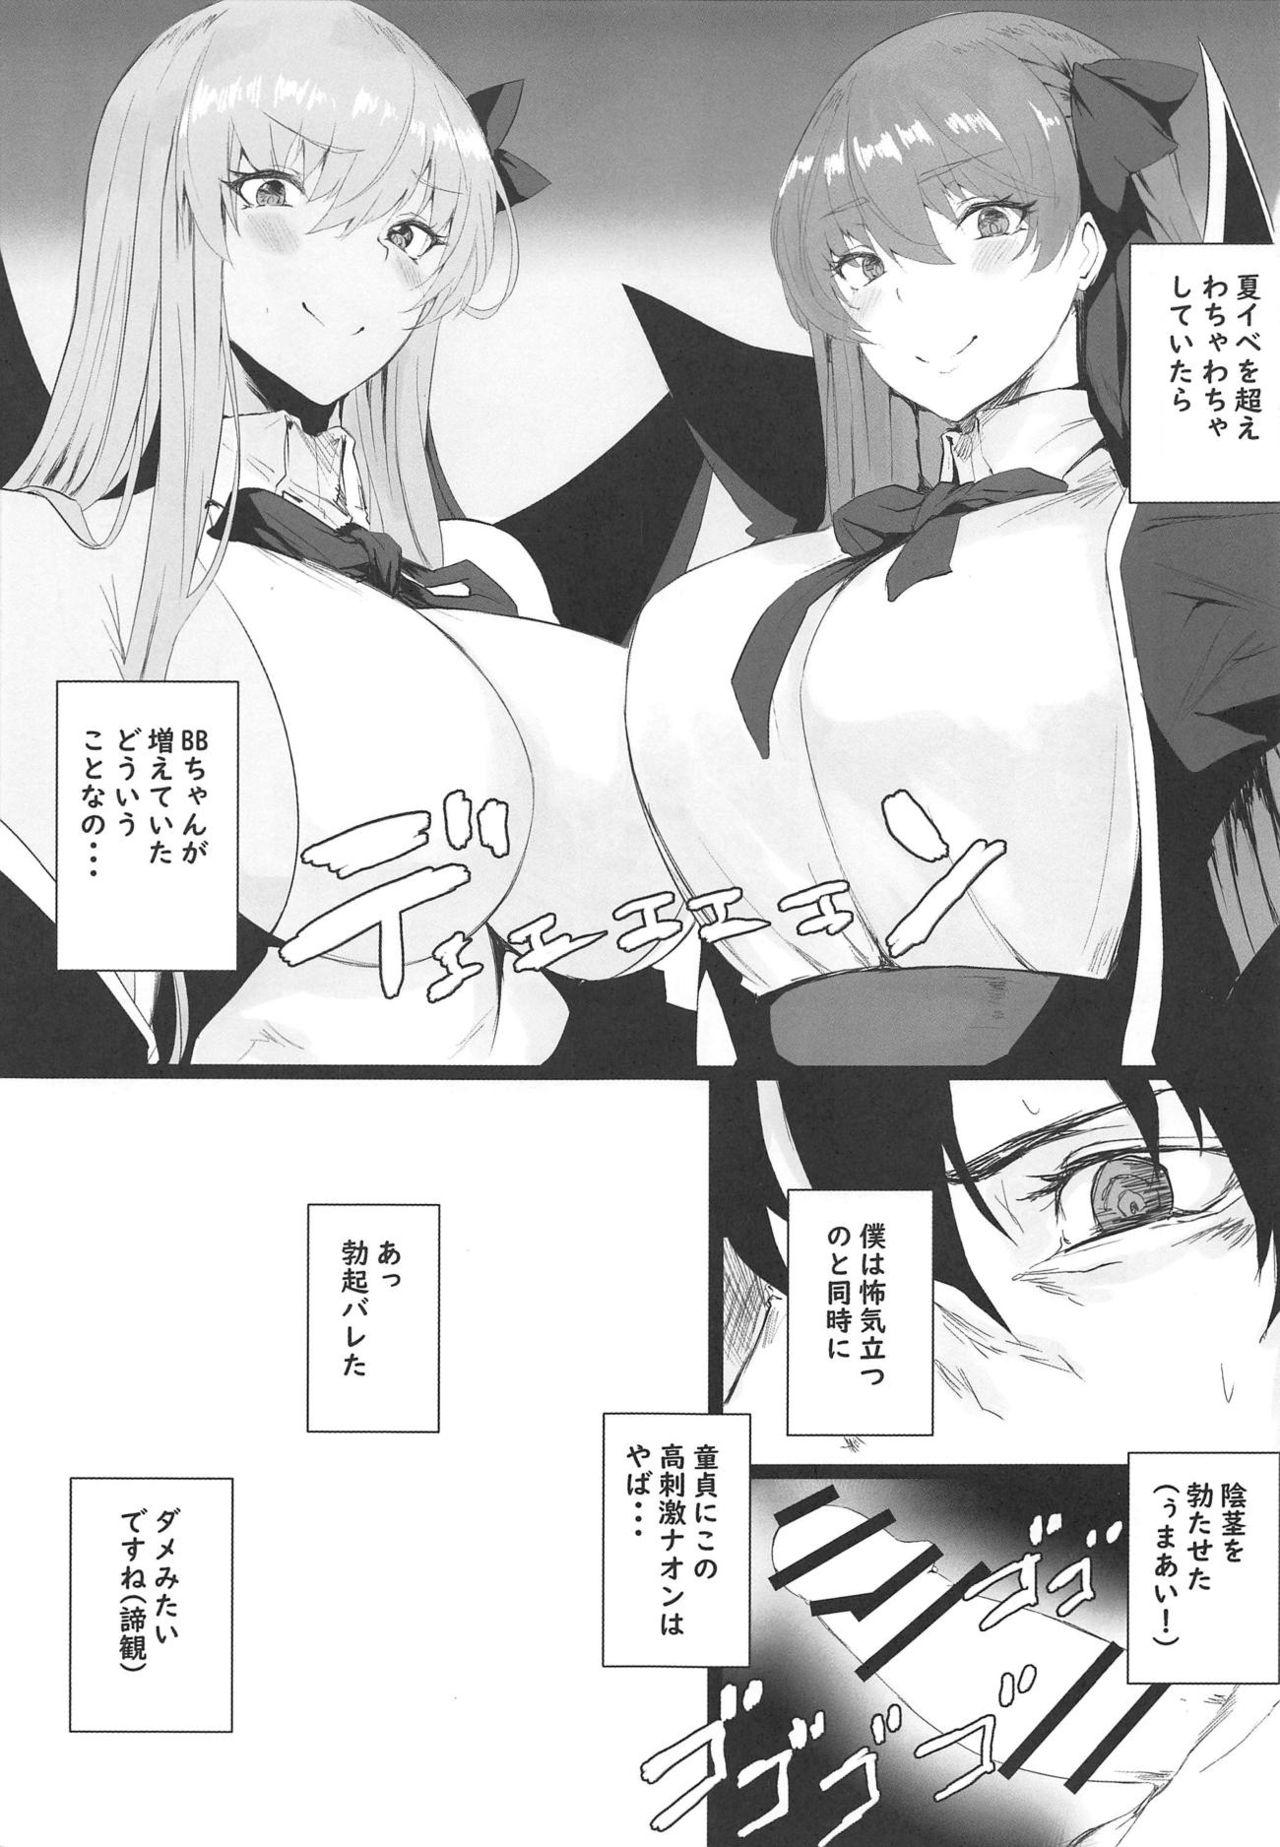 Cams VIOLATE A SANCTUARY - Fate grand order With - Page 2